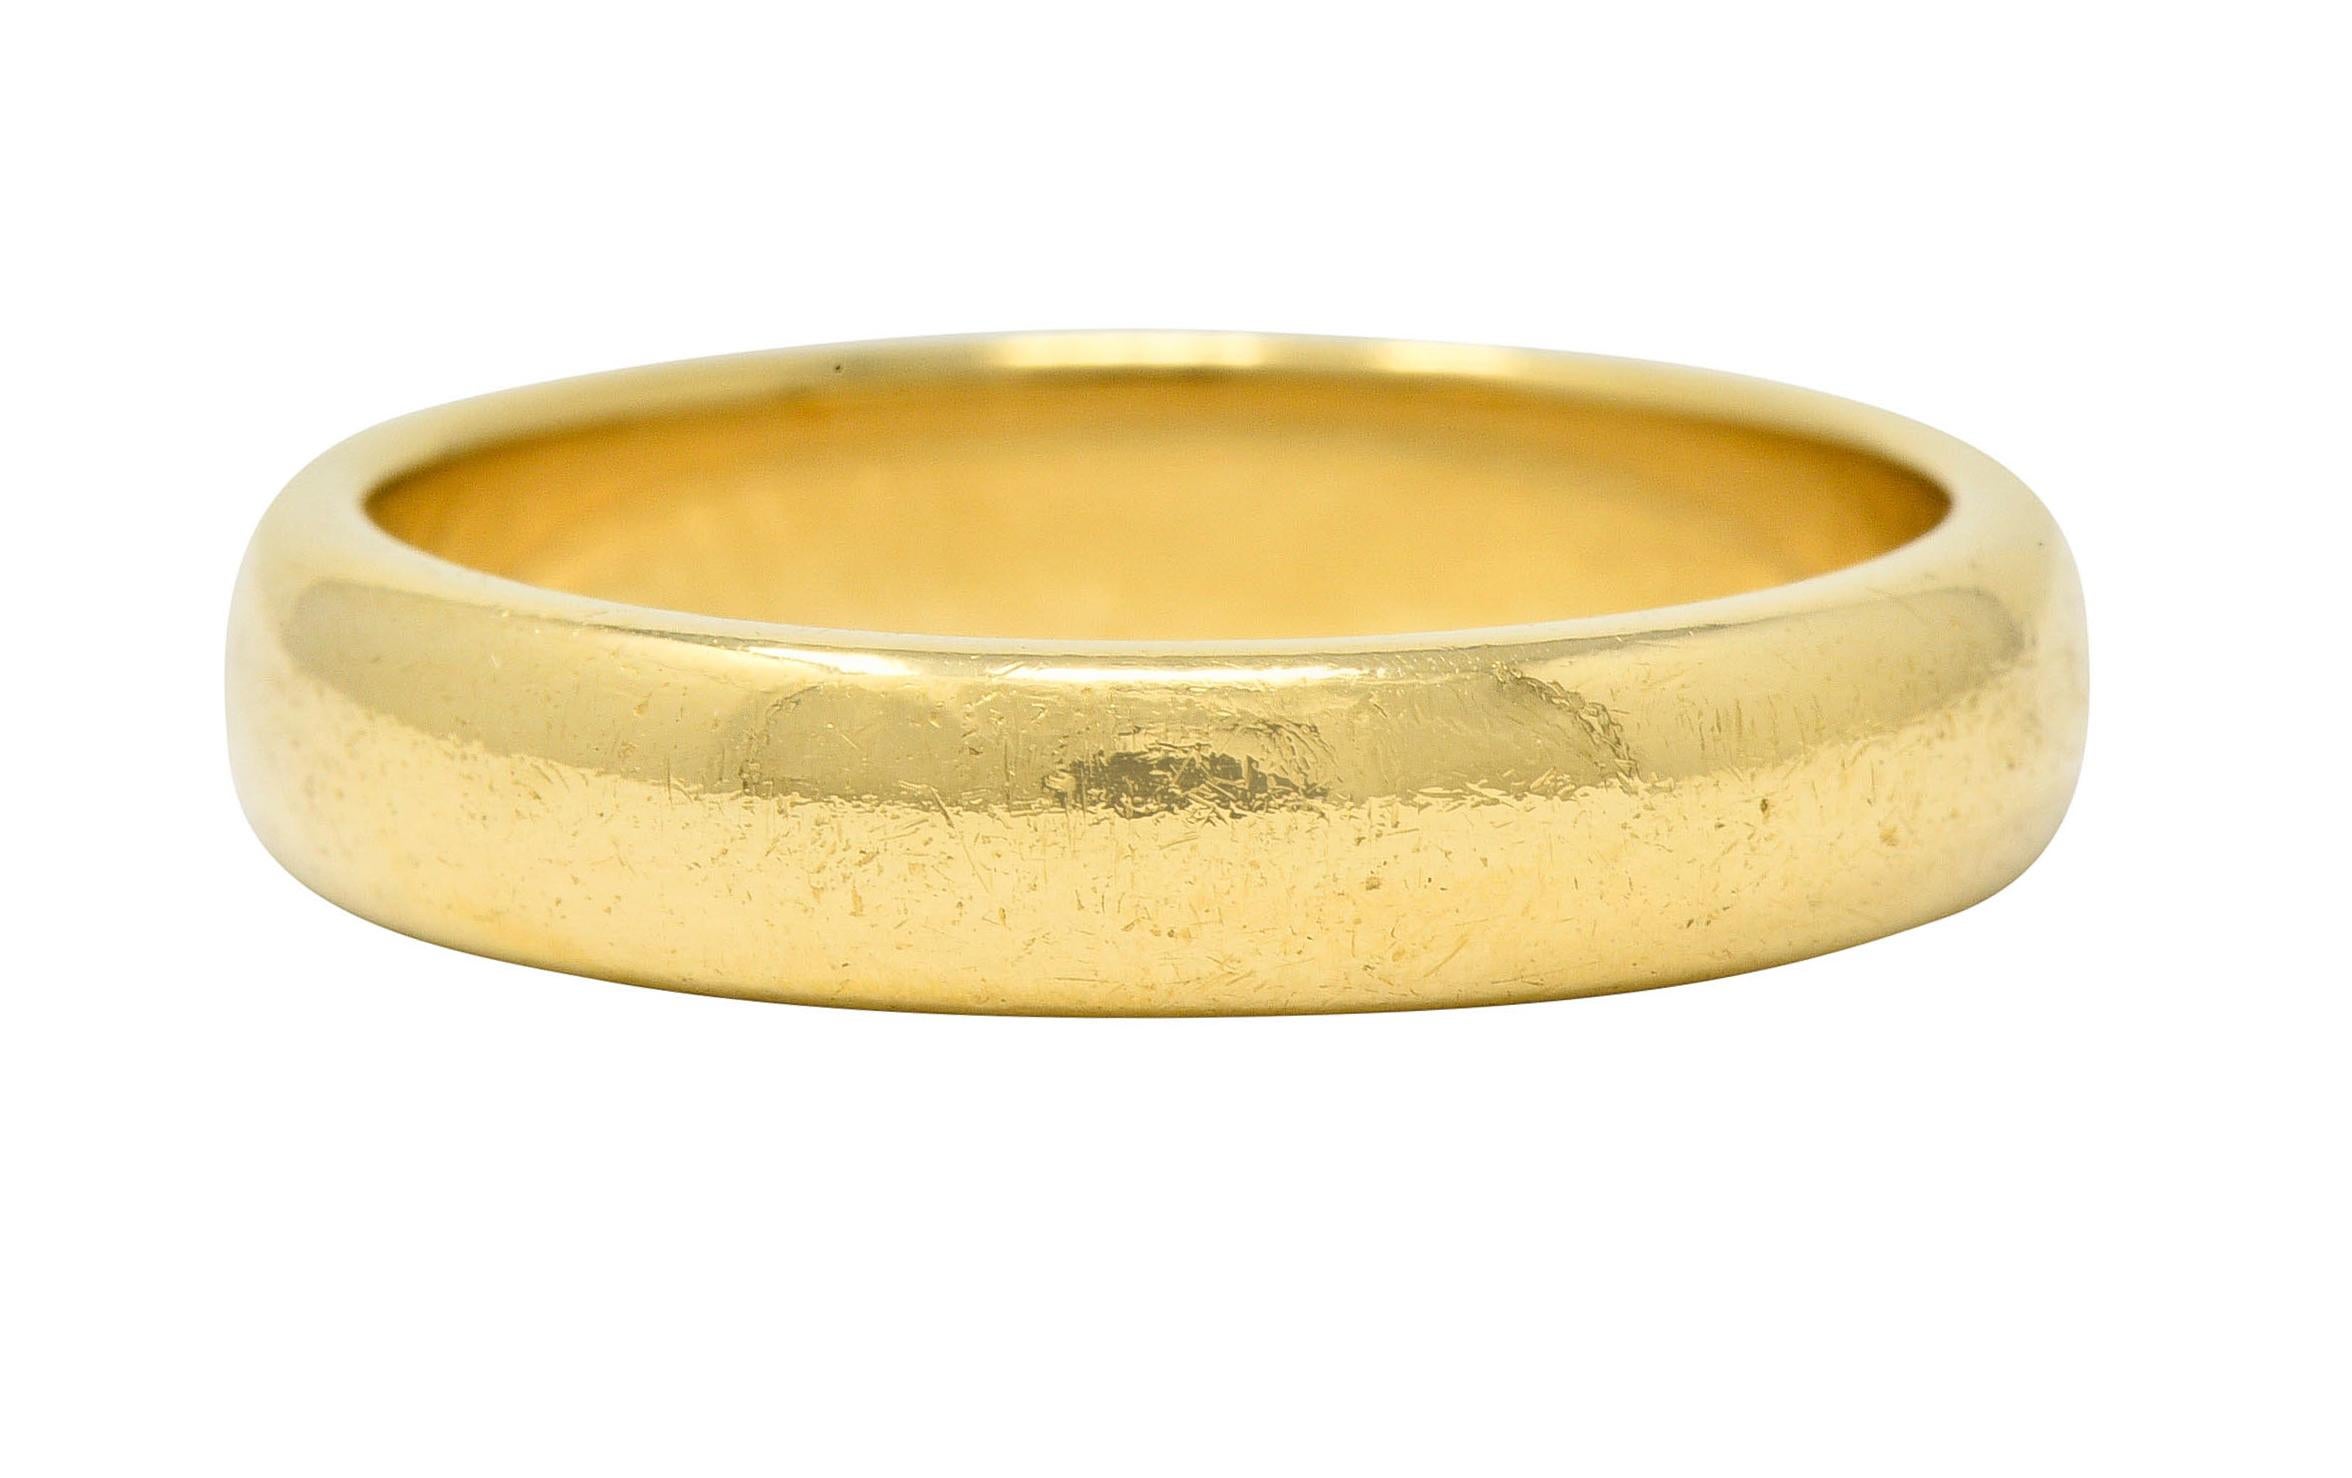 Wide band ring features a rounded curvature

With a brightly polished finish

Stamped AU750 for 18 karat gold

Fully signed Tiffany & Co.

Ring Size: 8 3/4 & sizable

Measures: 4.5 mm wide and sits 1.8 mm high

Total weight: 7.2 grams

Ideal.